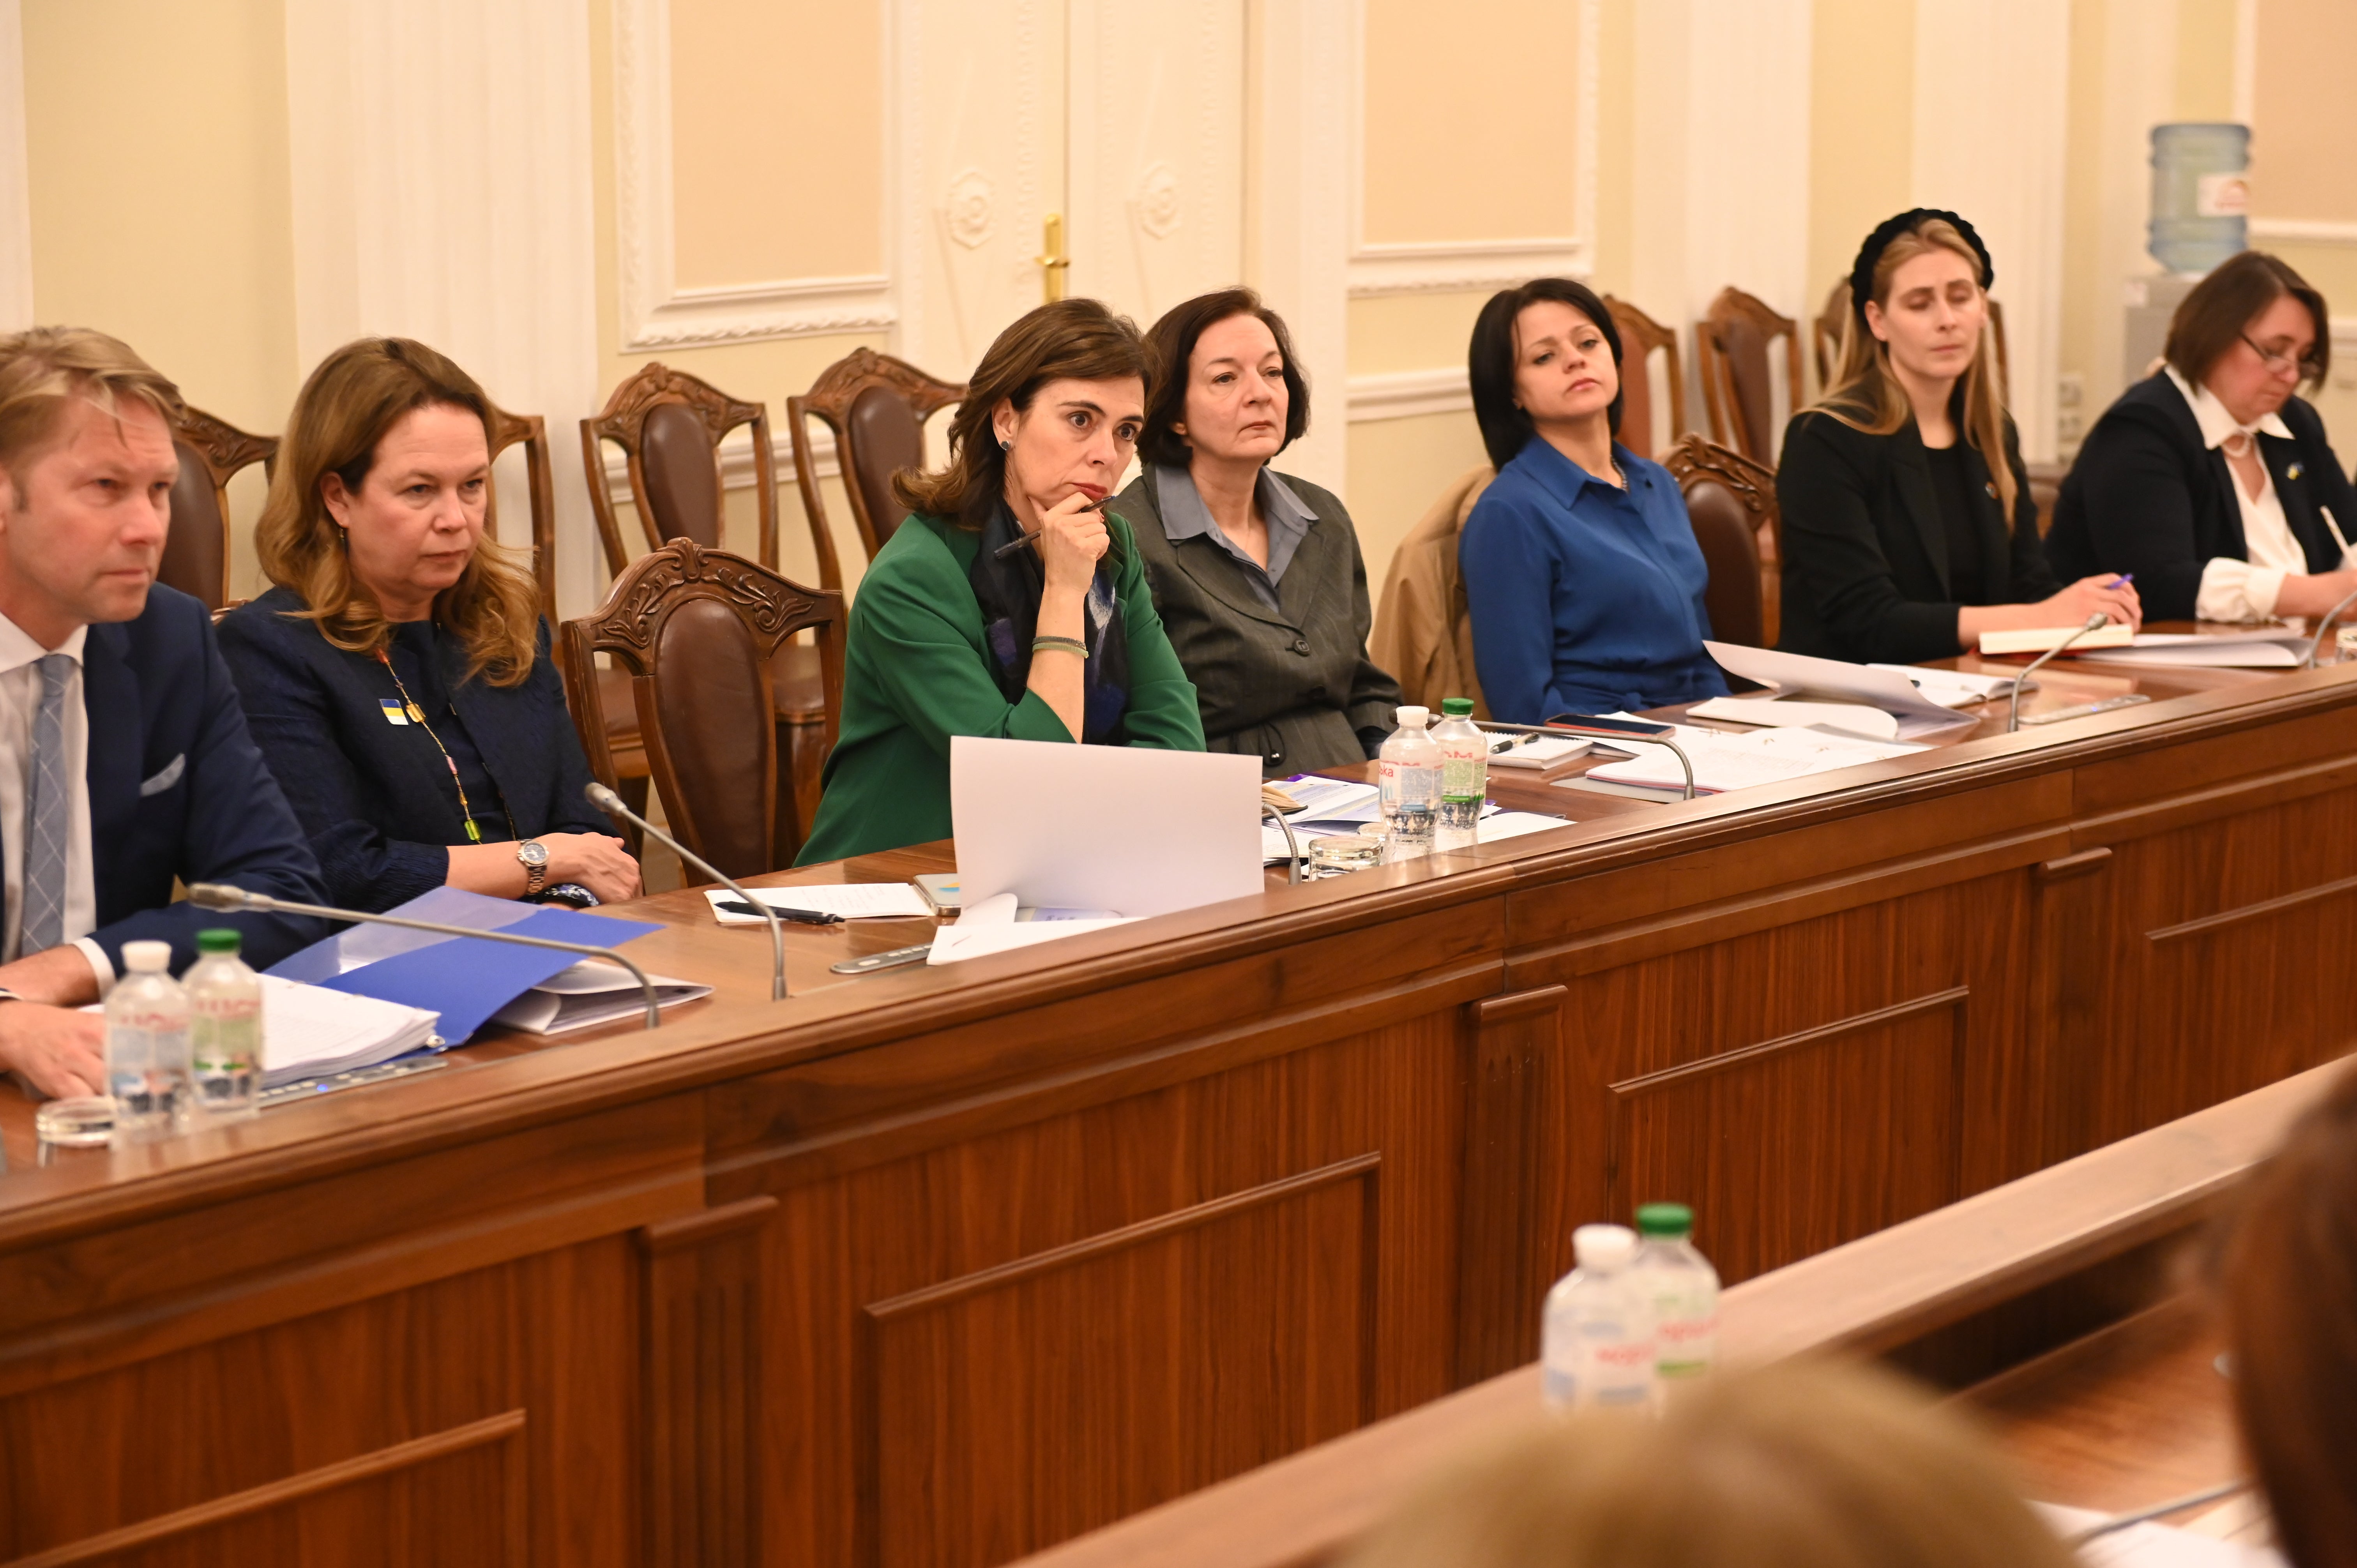 Meeting of the Executive Board with the Government Commissioner for Gender Policy, Kateryna Levchenko. Photo: UN Women/Dmytro Korenev